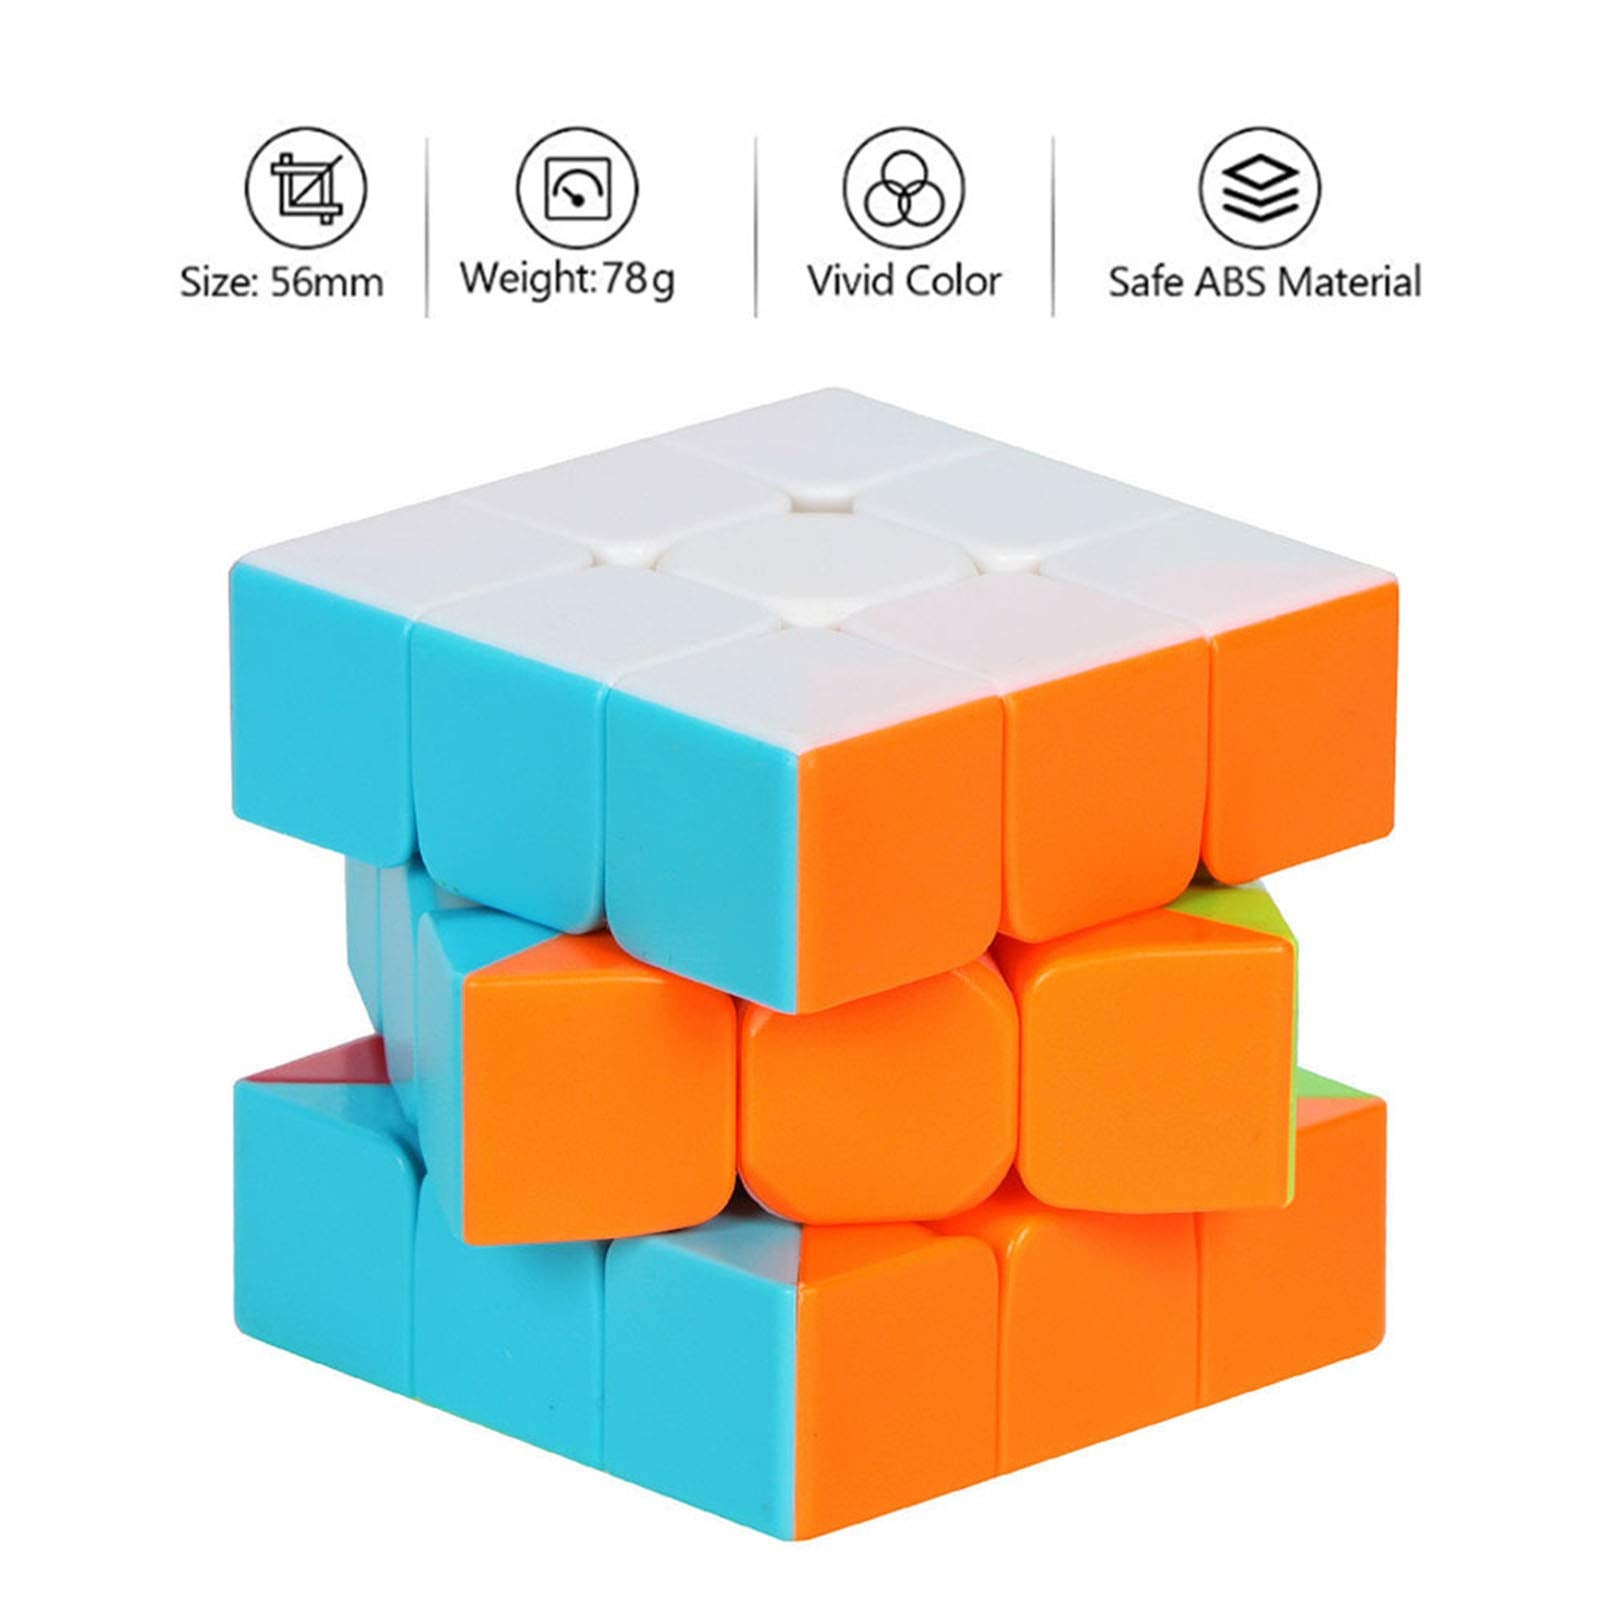 Speed Cube 3x3x3 Jurnwey Stickerless with Cube Tutorial - Turning Speedly Smoothly Magic Cubes 3x3 Puzzle Game Brain Toy for Kids and Adult